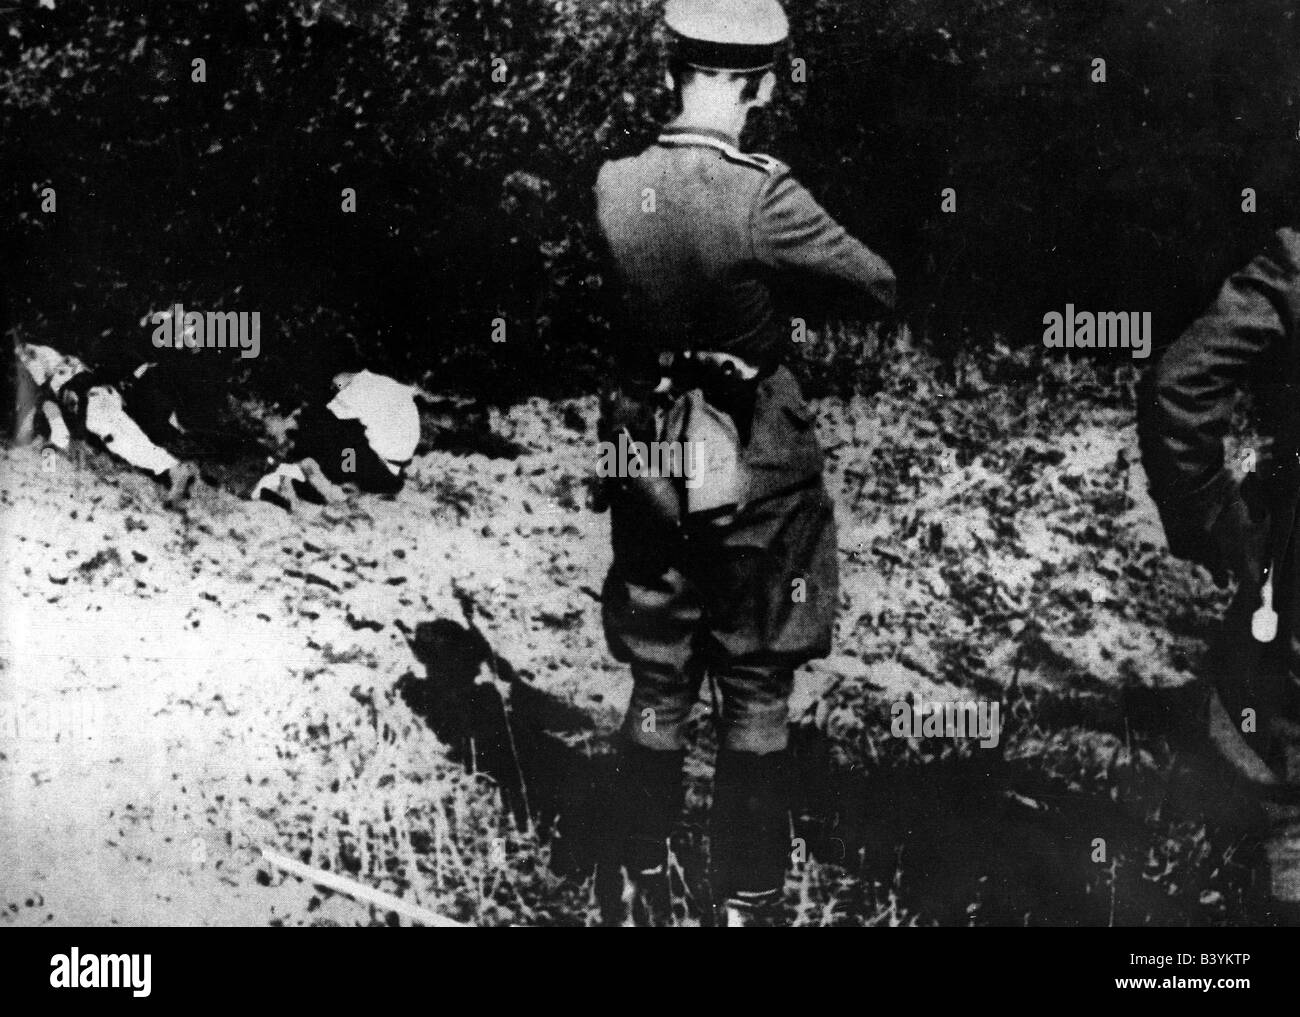 events, Second World War / WWII, Poland, German occupation, execution in the garden of the Polish parliament, Warsaw, October 1939, Stock Photo